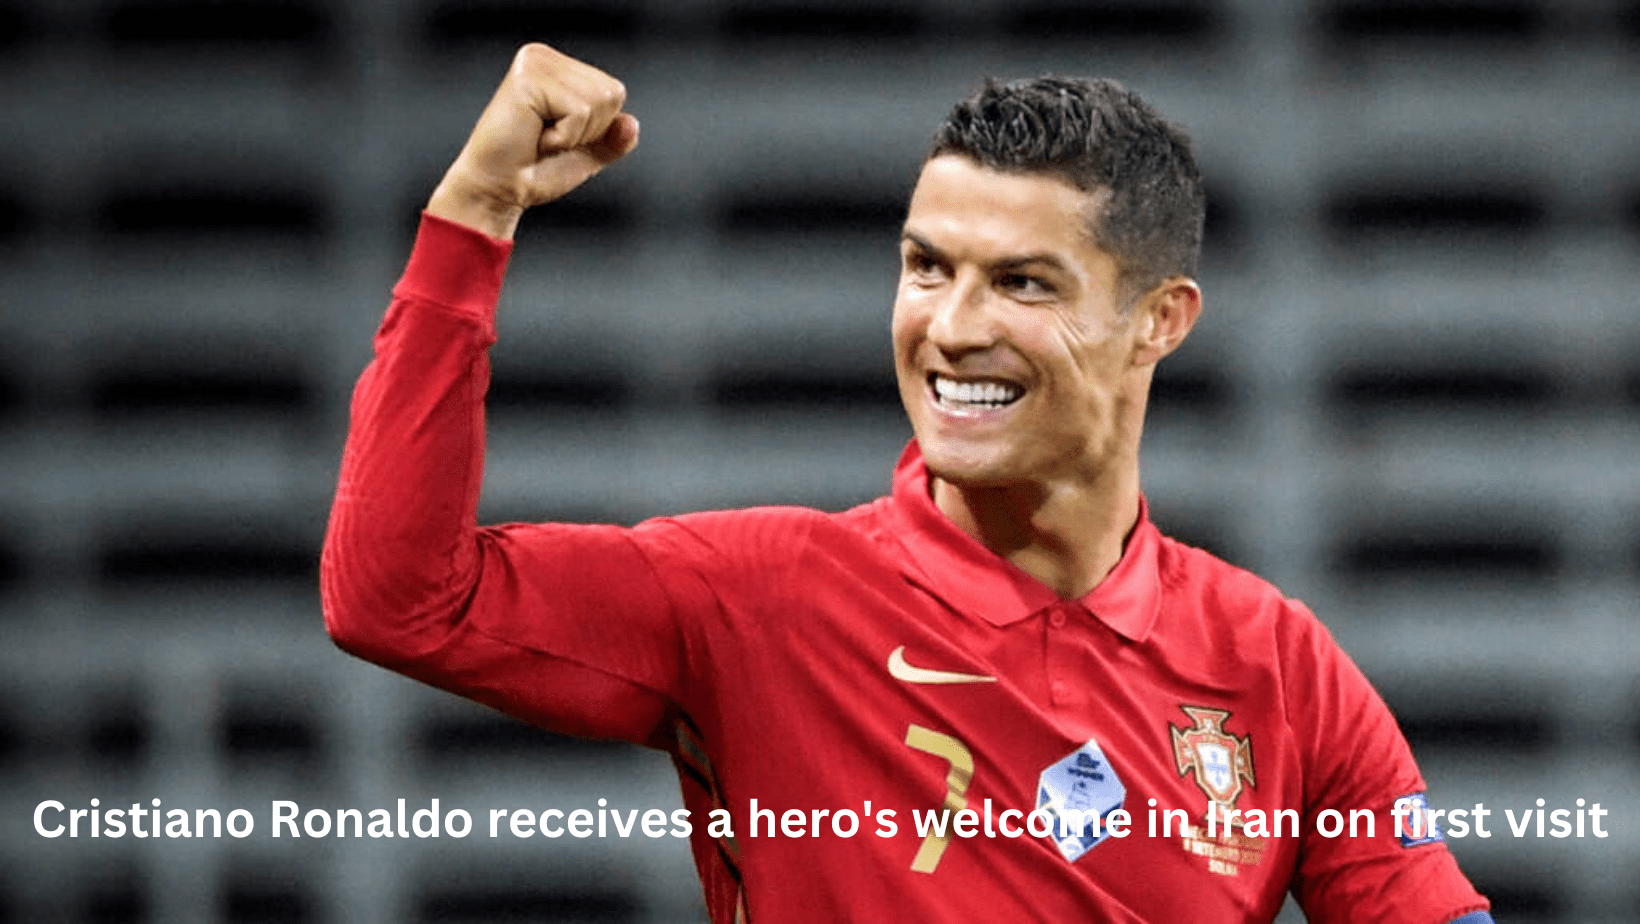 Cristiano Ronaldo receives a Warm Welcome in Iran on first visit